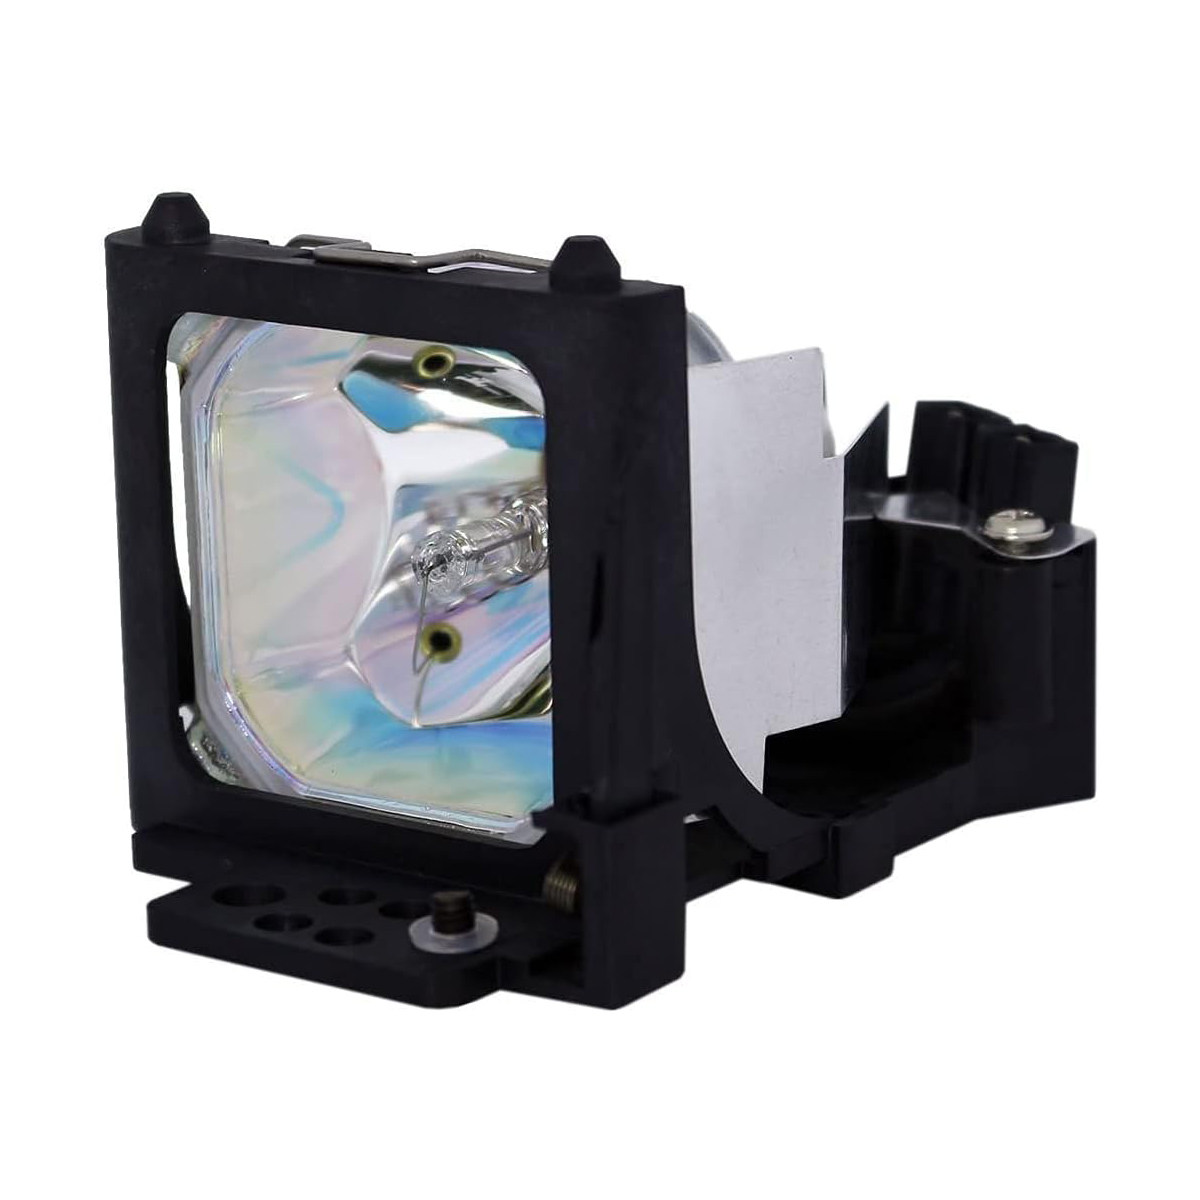 Replacement Projector lamp 456-234 For Dukane Projector